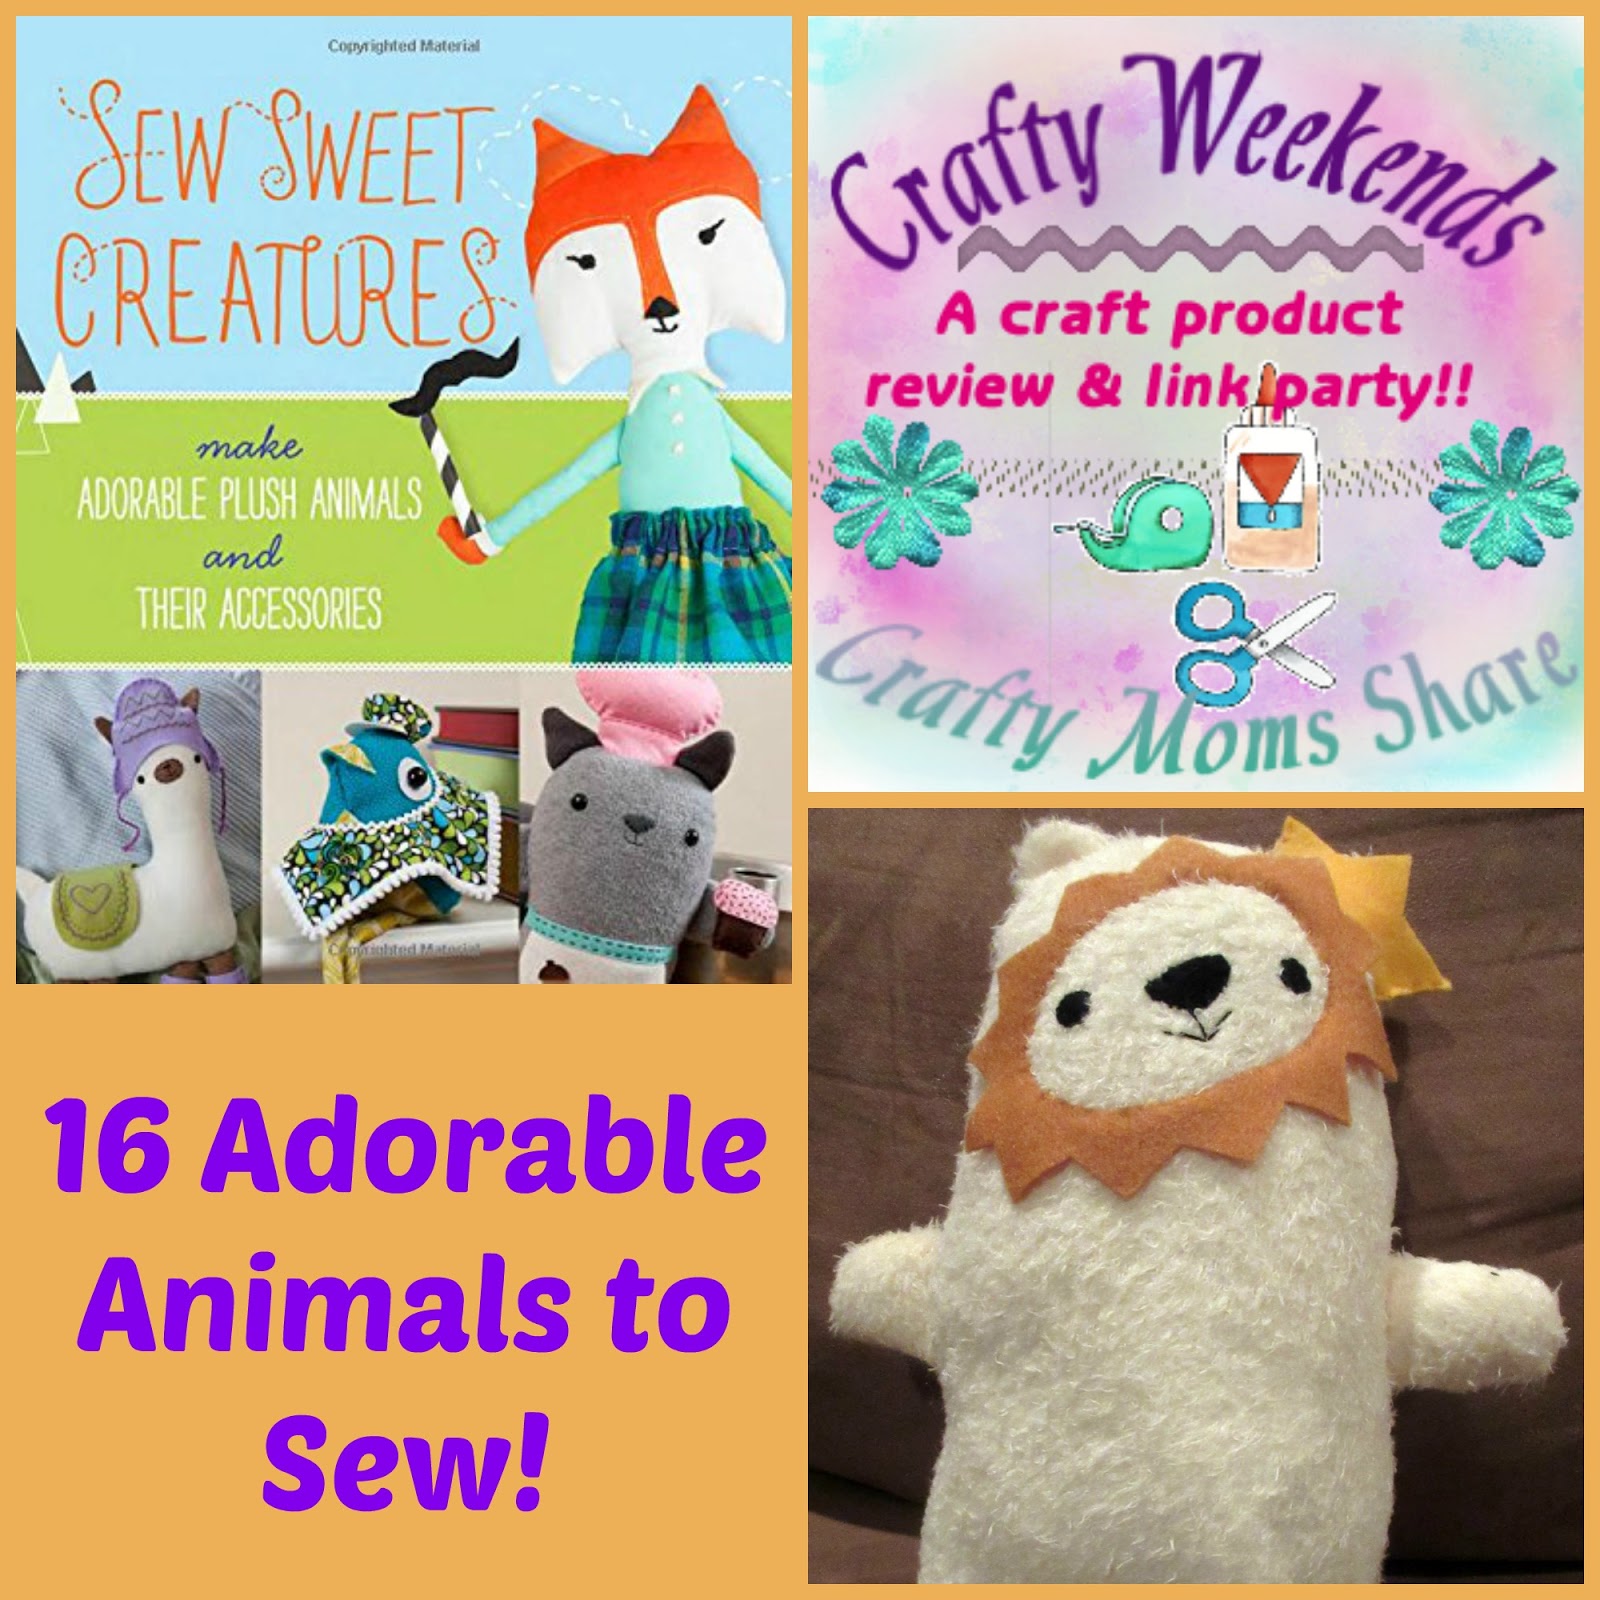 Crafty Moms Share: Sew Sweet Creatures -- Crafty Weekends Review and Link  Party